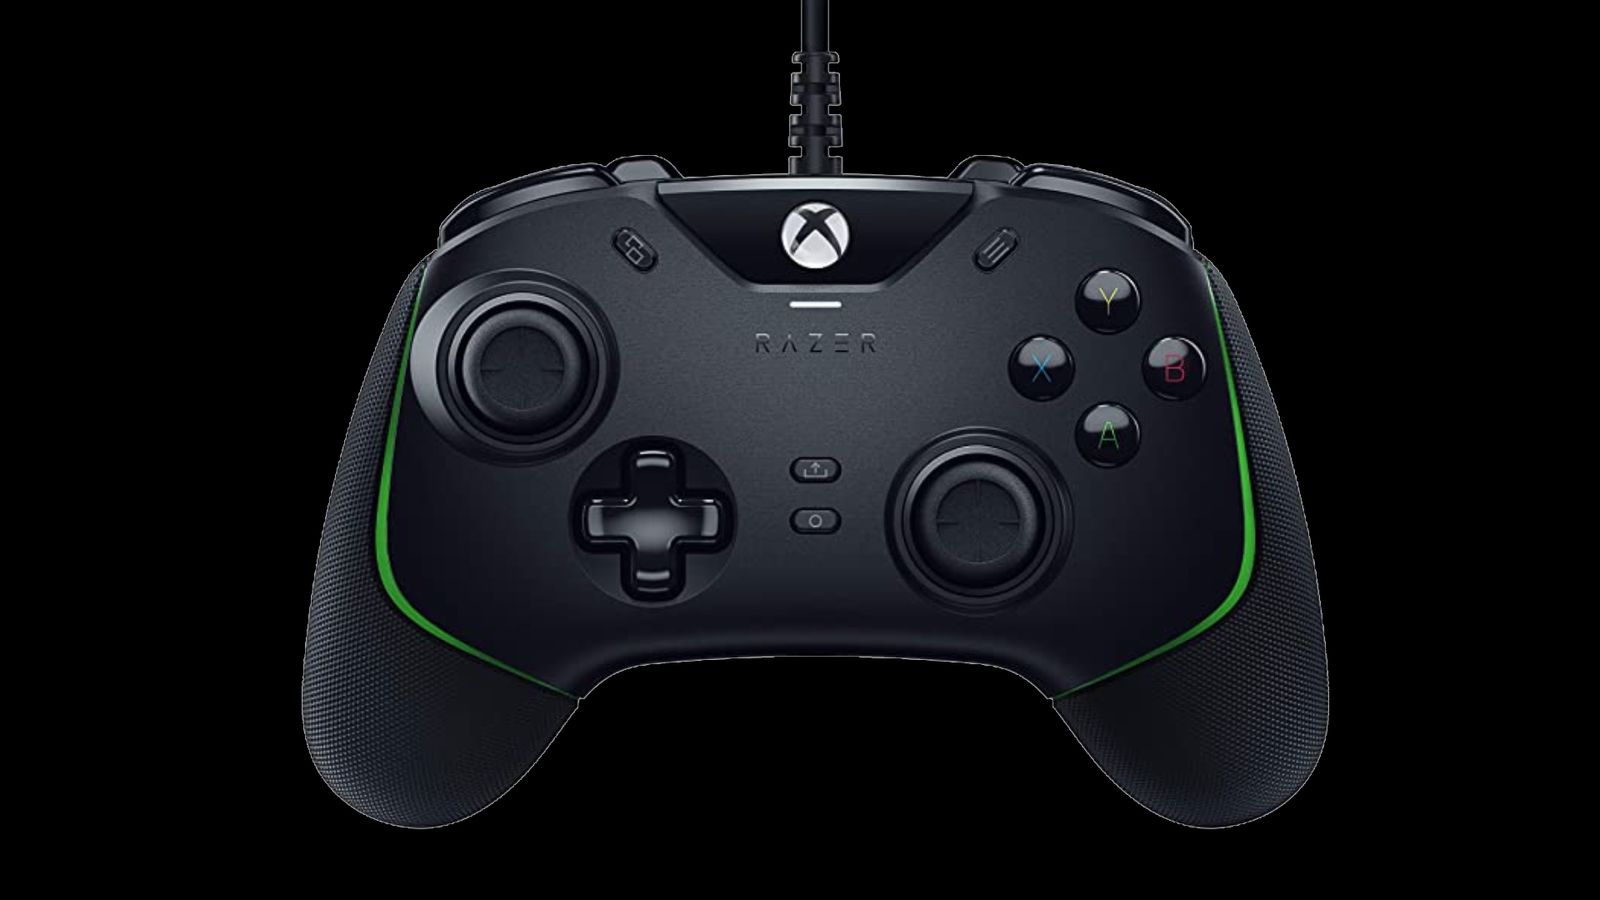 Razer Wolverine V2 product image of a black Xbox-style controller with green accents.